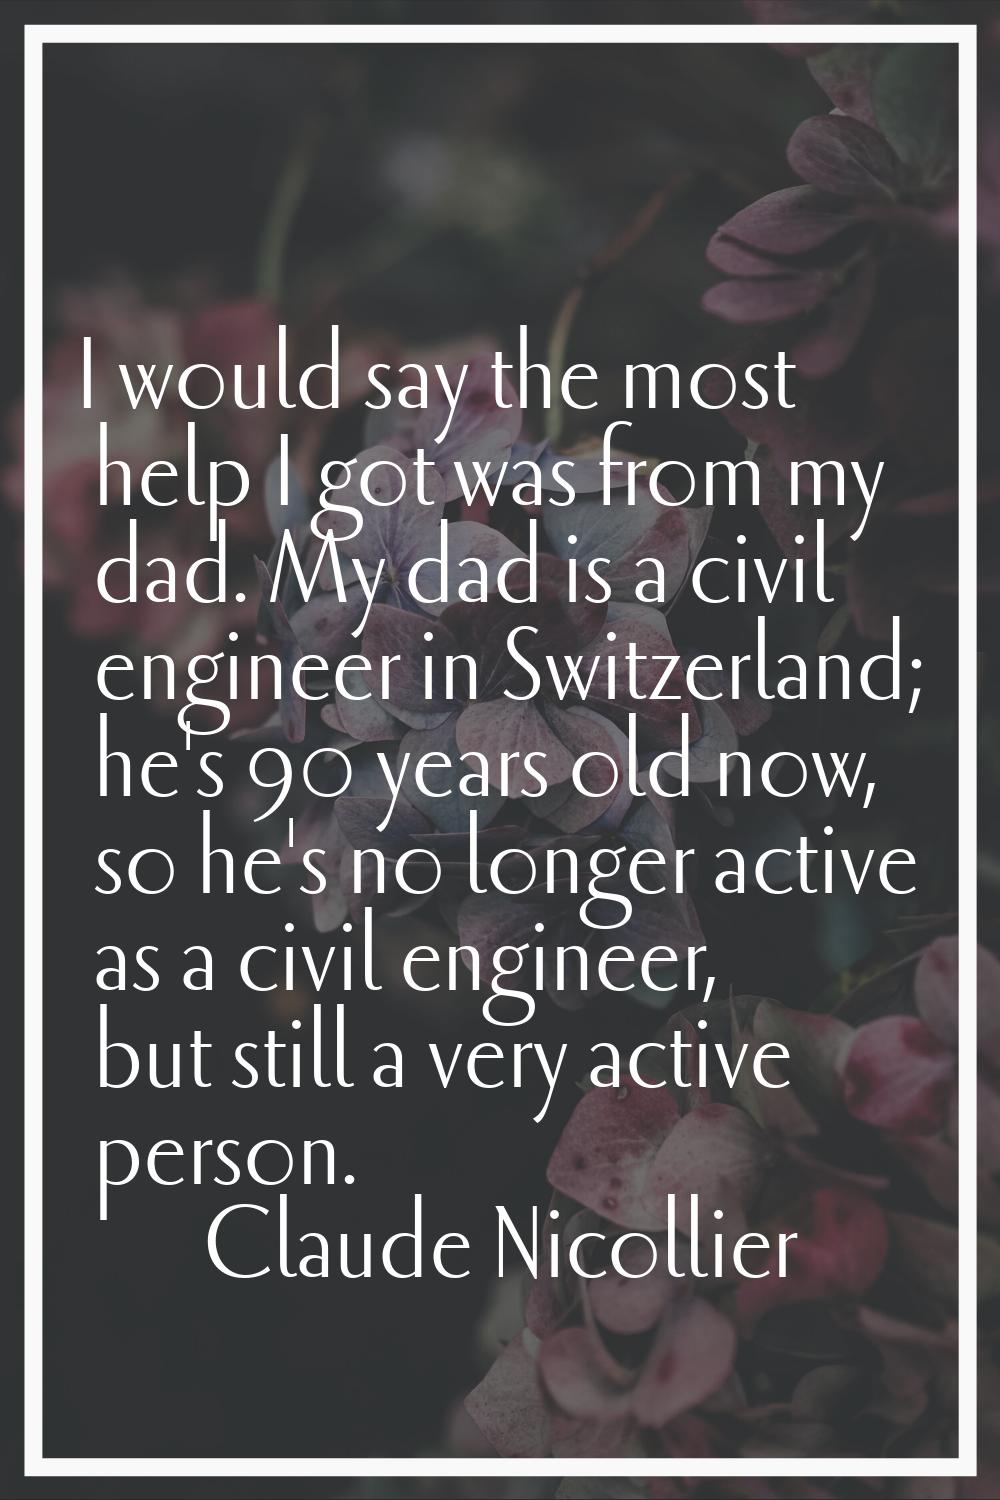 I would say the most help I got was from my dad. My dad is a civil engineer in Switzerland; he's 90